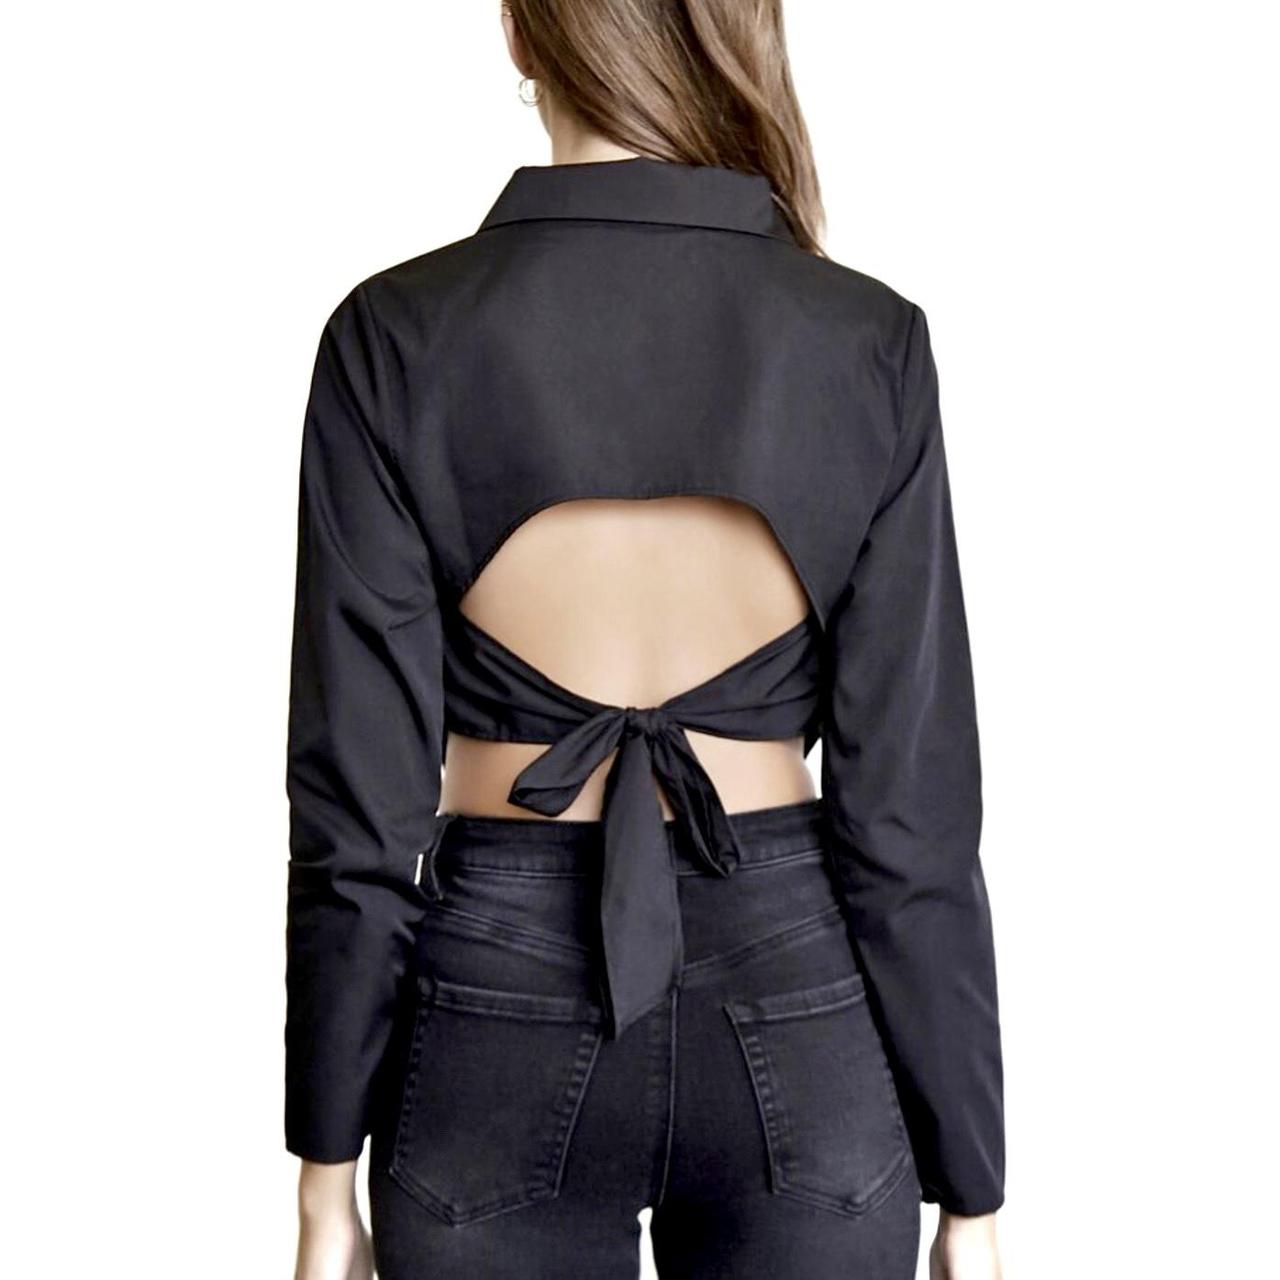 Product Image 2 - Tie back crop top🖤
-NWT :